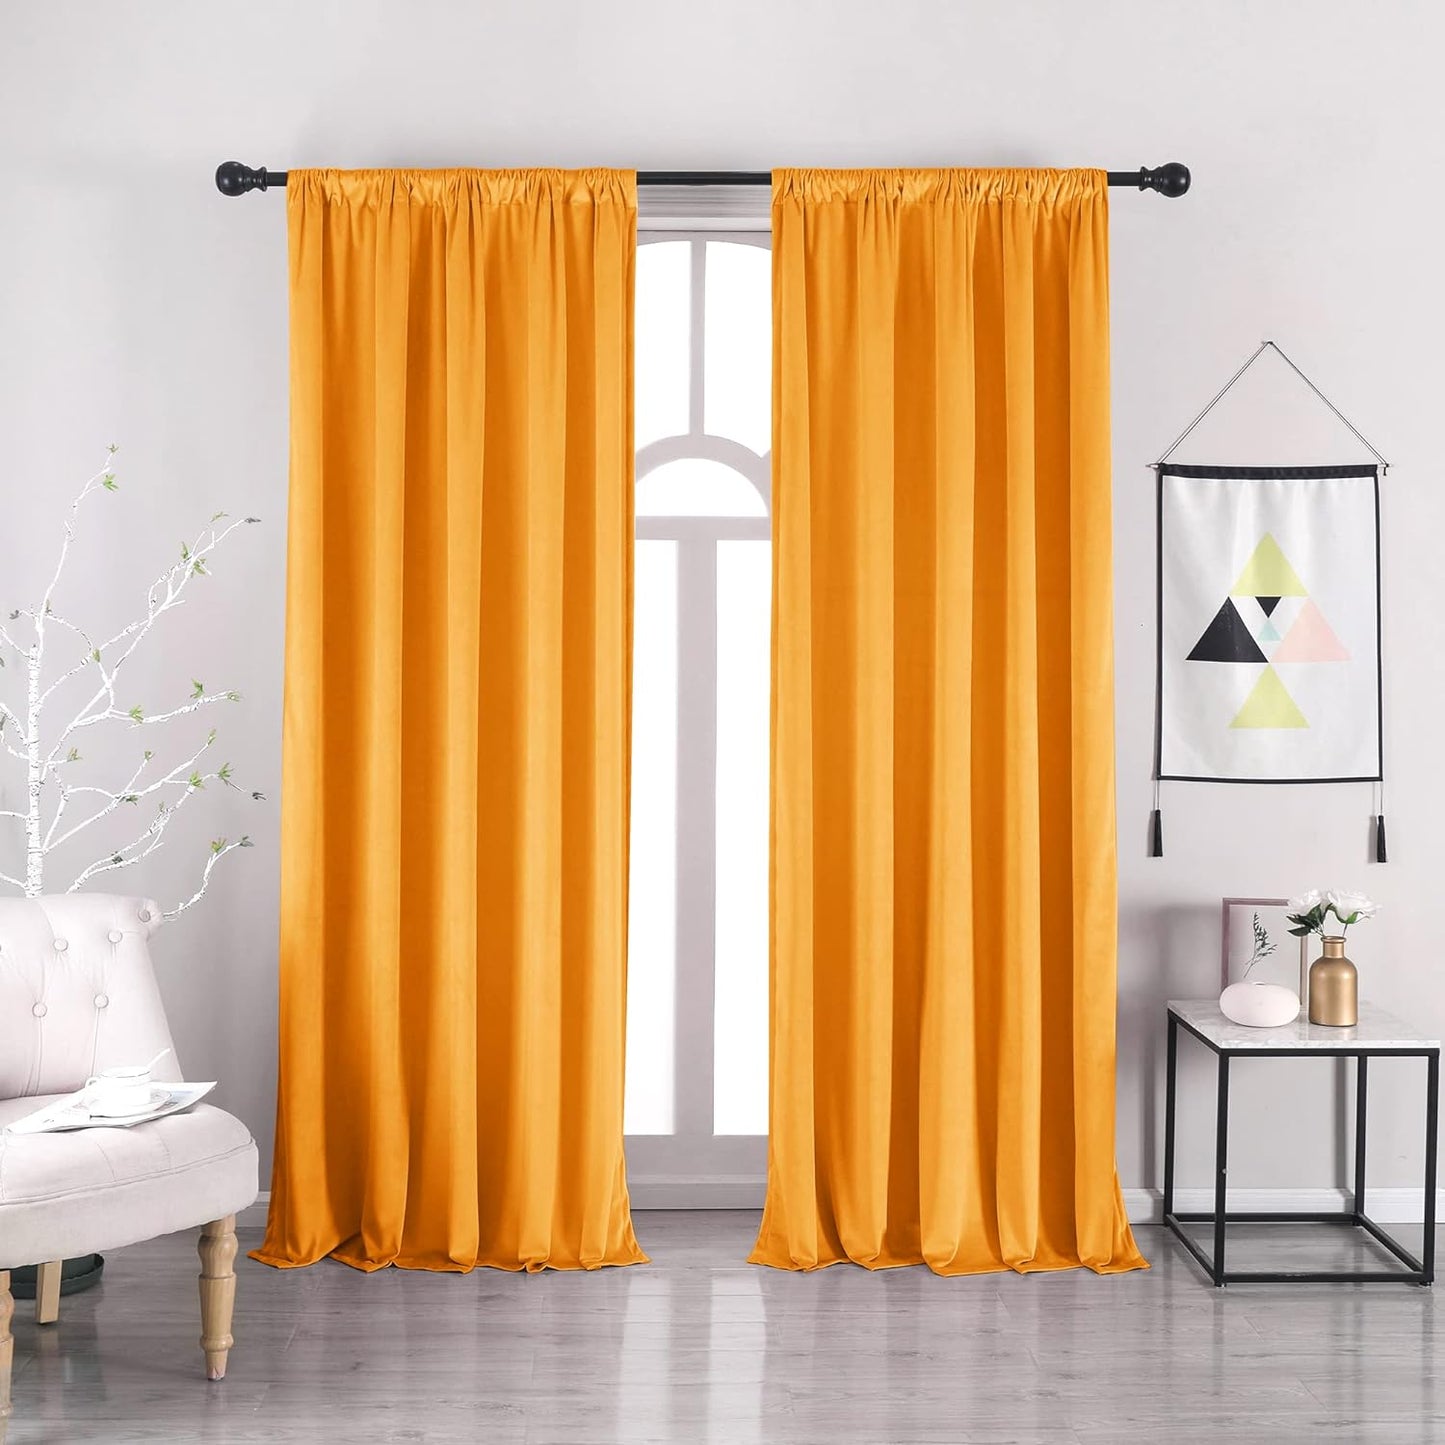 Nanbowang Green Velvet Curtains 63 Inches Long Dark Green Light Blocking Rod Pocket Window Curtain Panels Set of 2 Heat Insulated Curtains Thermal Curtain Panels for Bedroom  nanbowang Orange 52"X72" 